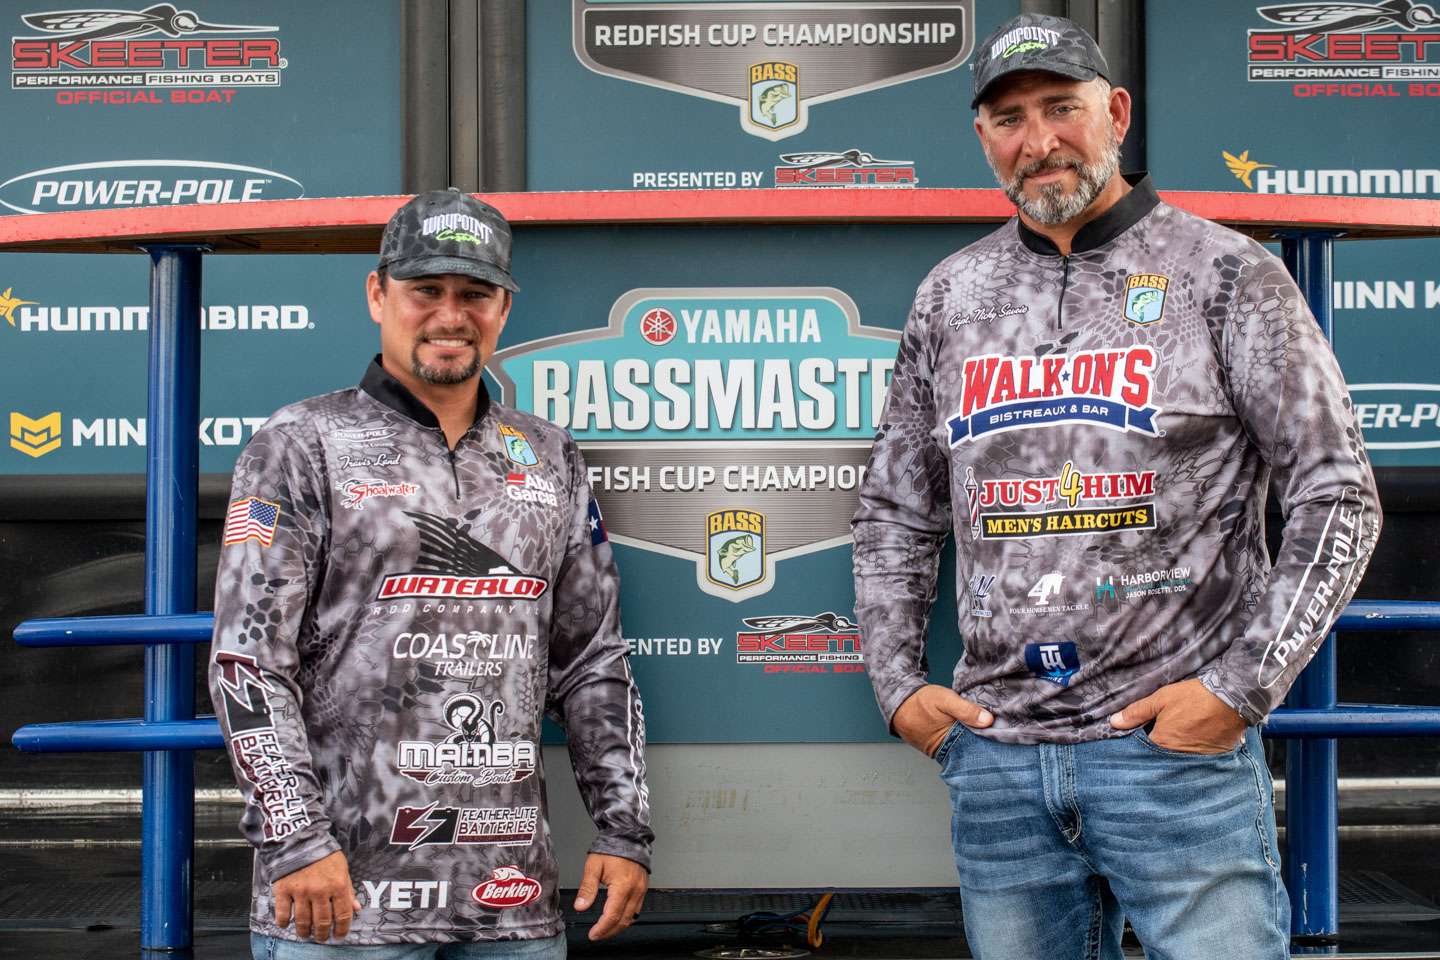 Meet the anglers who will be competing in the 2021 Yamaha Bassmaster Redfish Cup Championship presented by Skeeter! <br><br>First up, Travis Land and Nicky Savoie.